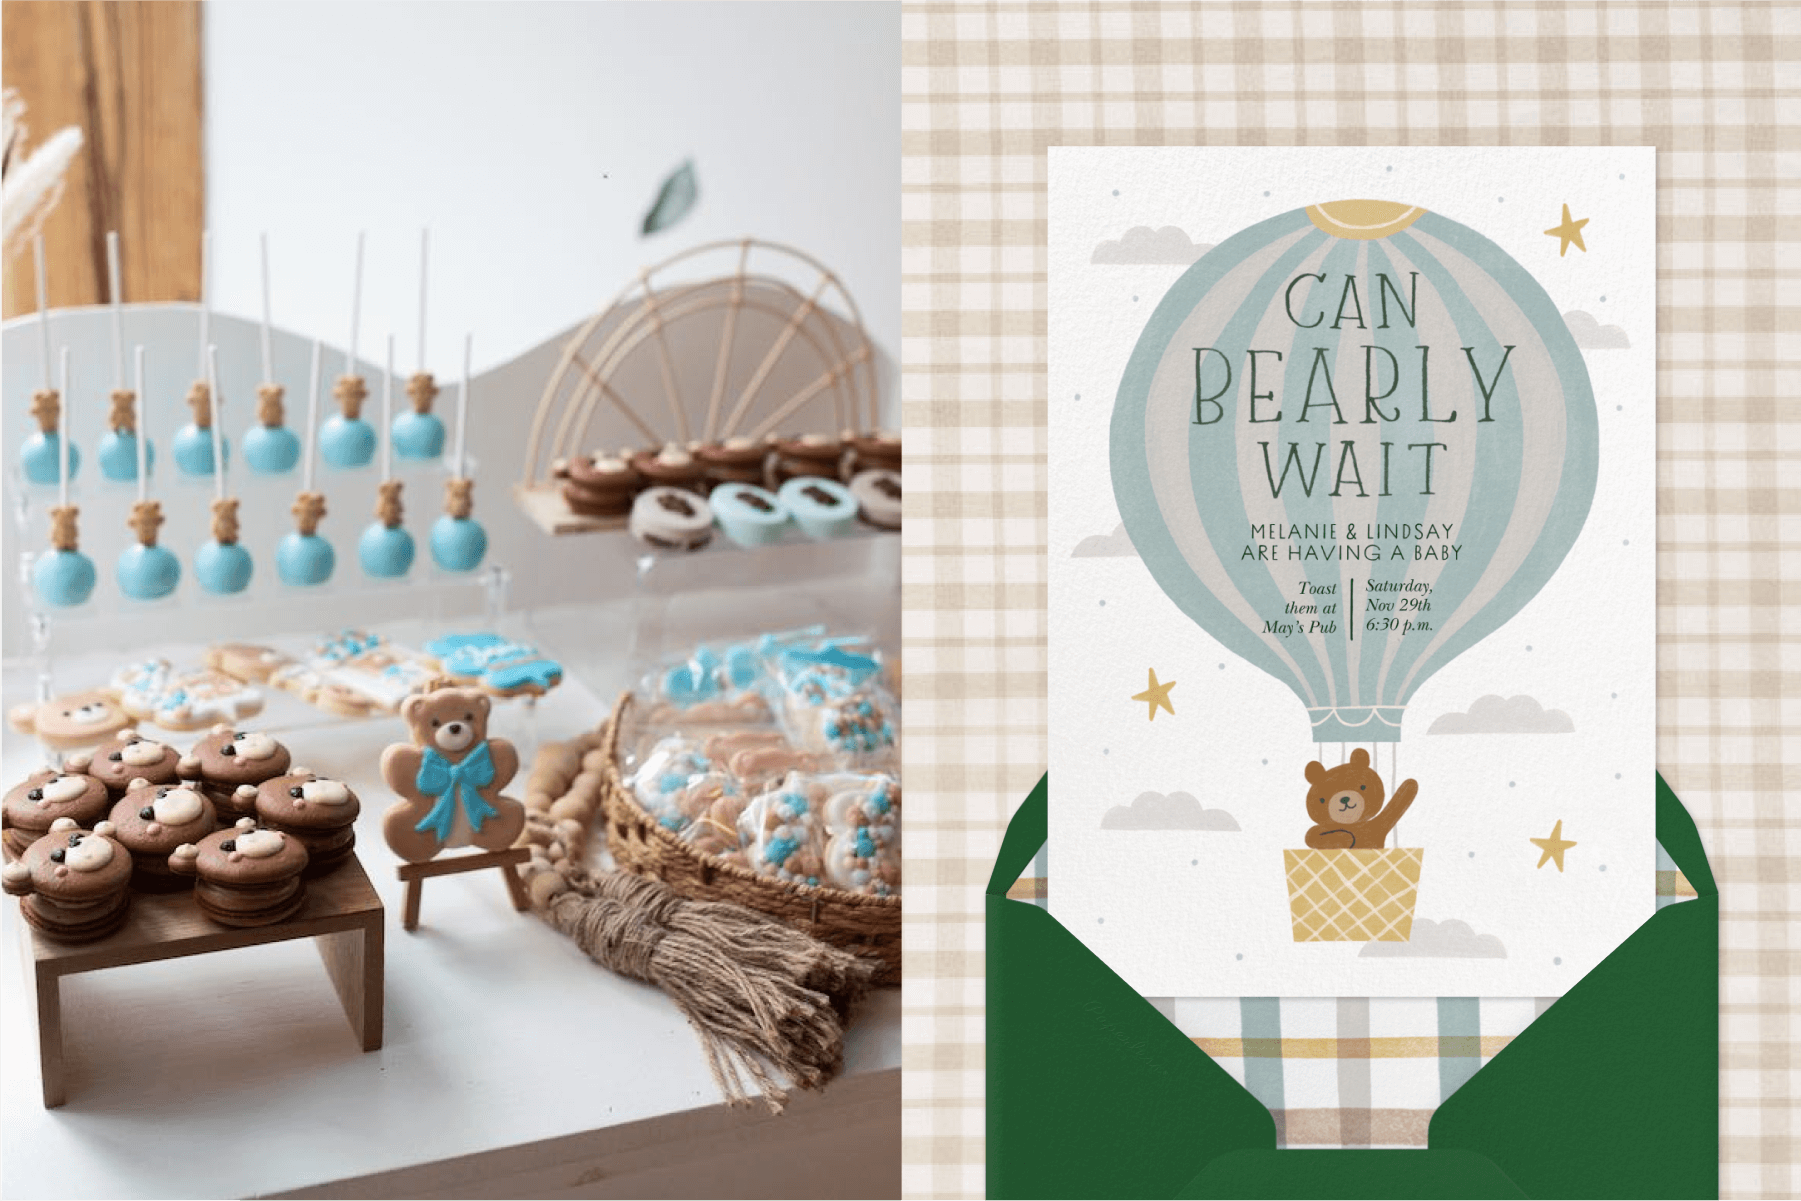 Left: Teddy bear-themed cookies and treats; Right: an invitation with a teddy bear waving from a blue hot air balloon.